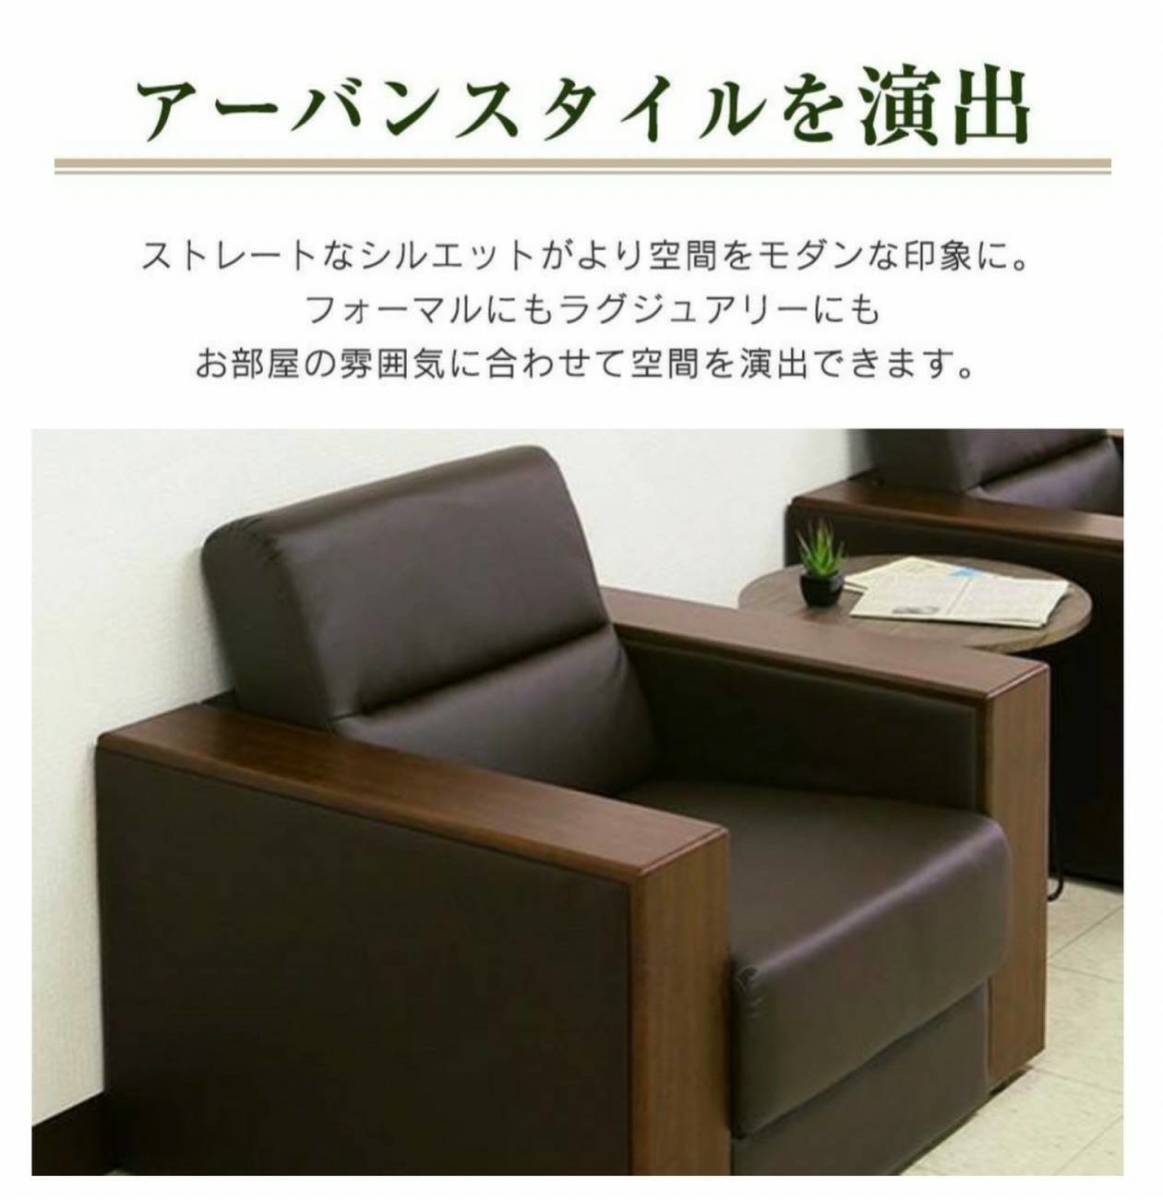  exhibition goods translation have therefore cheap prompt decision urban style personal sofa / width 88. wood grain armrest . attaching 1 person for sofa SF050-1P PVC Brown necessary construction 